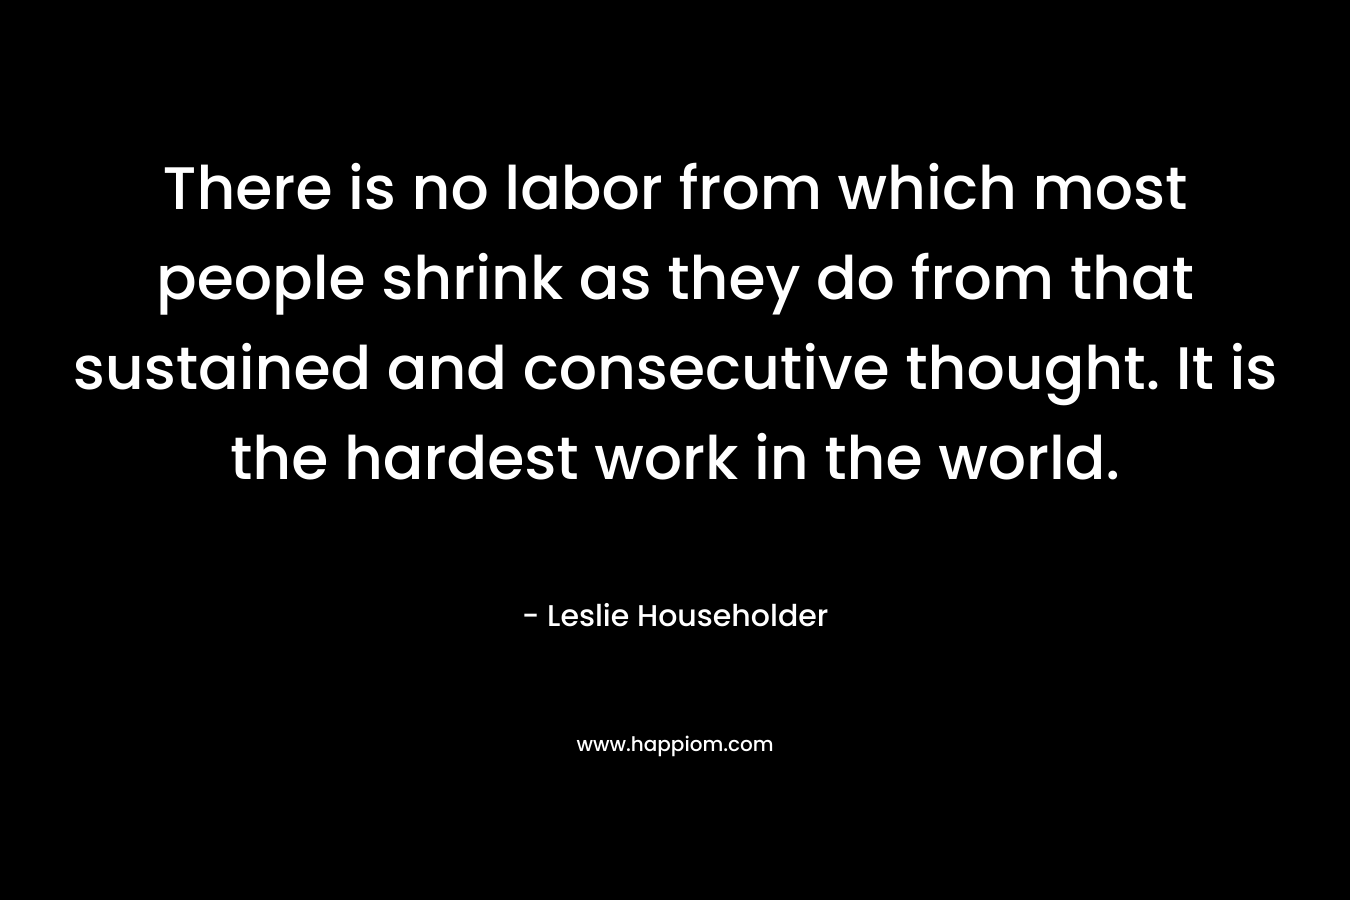 There is no labor from which most people shrink as they do from that sustained and consecutive thought. It is the hardest work in the world. – Leslie Householder